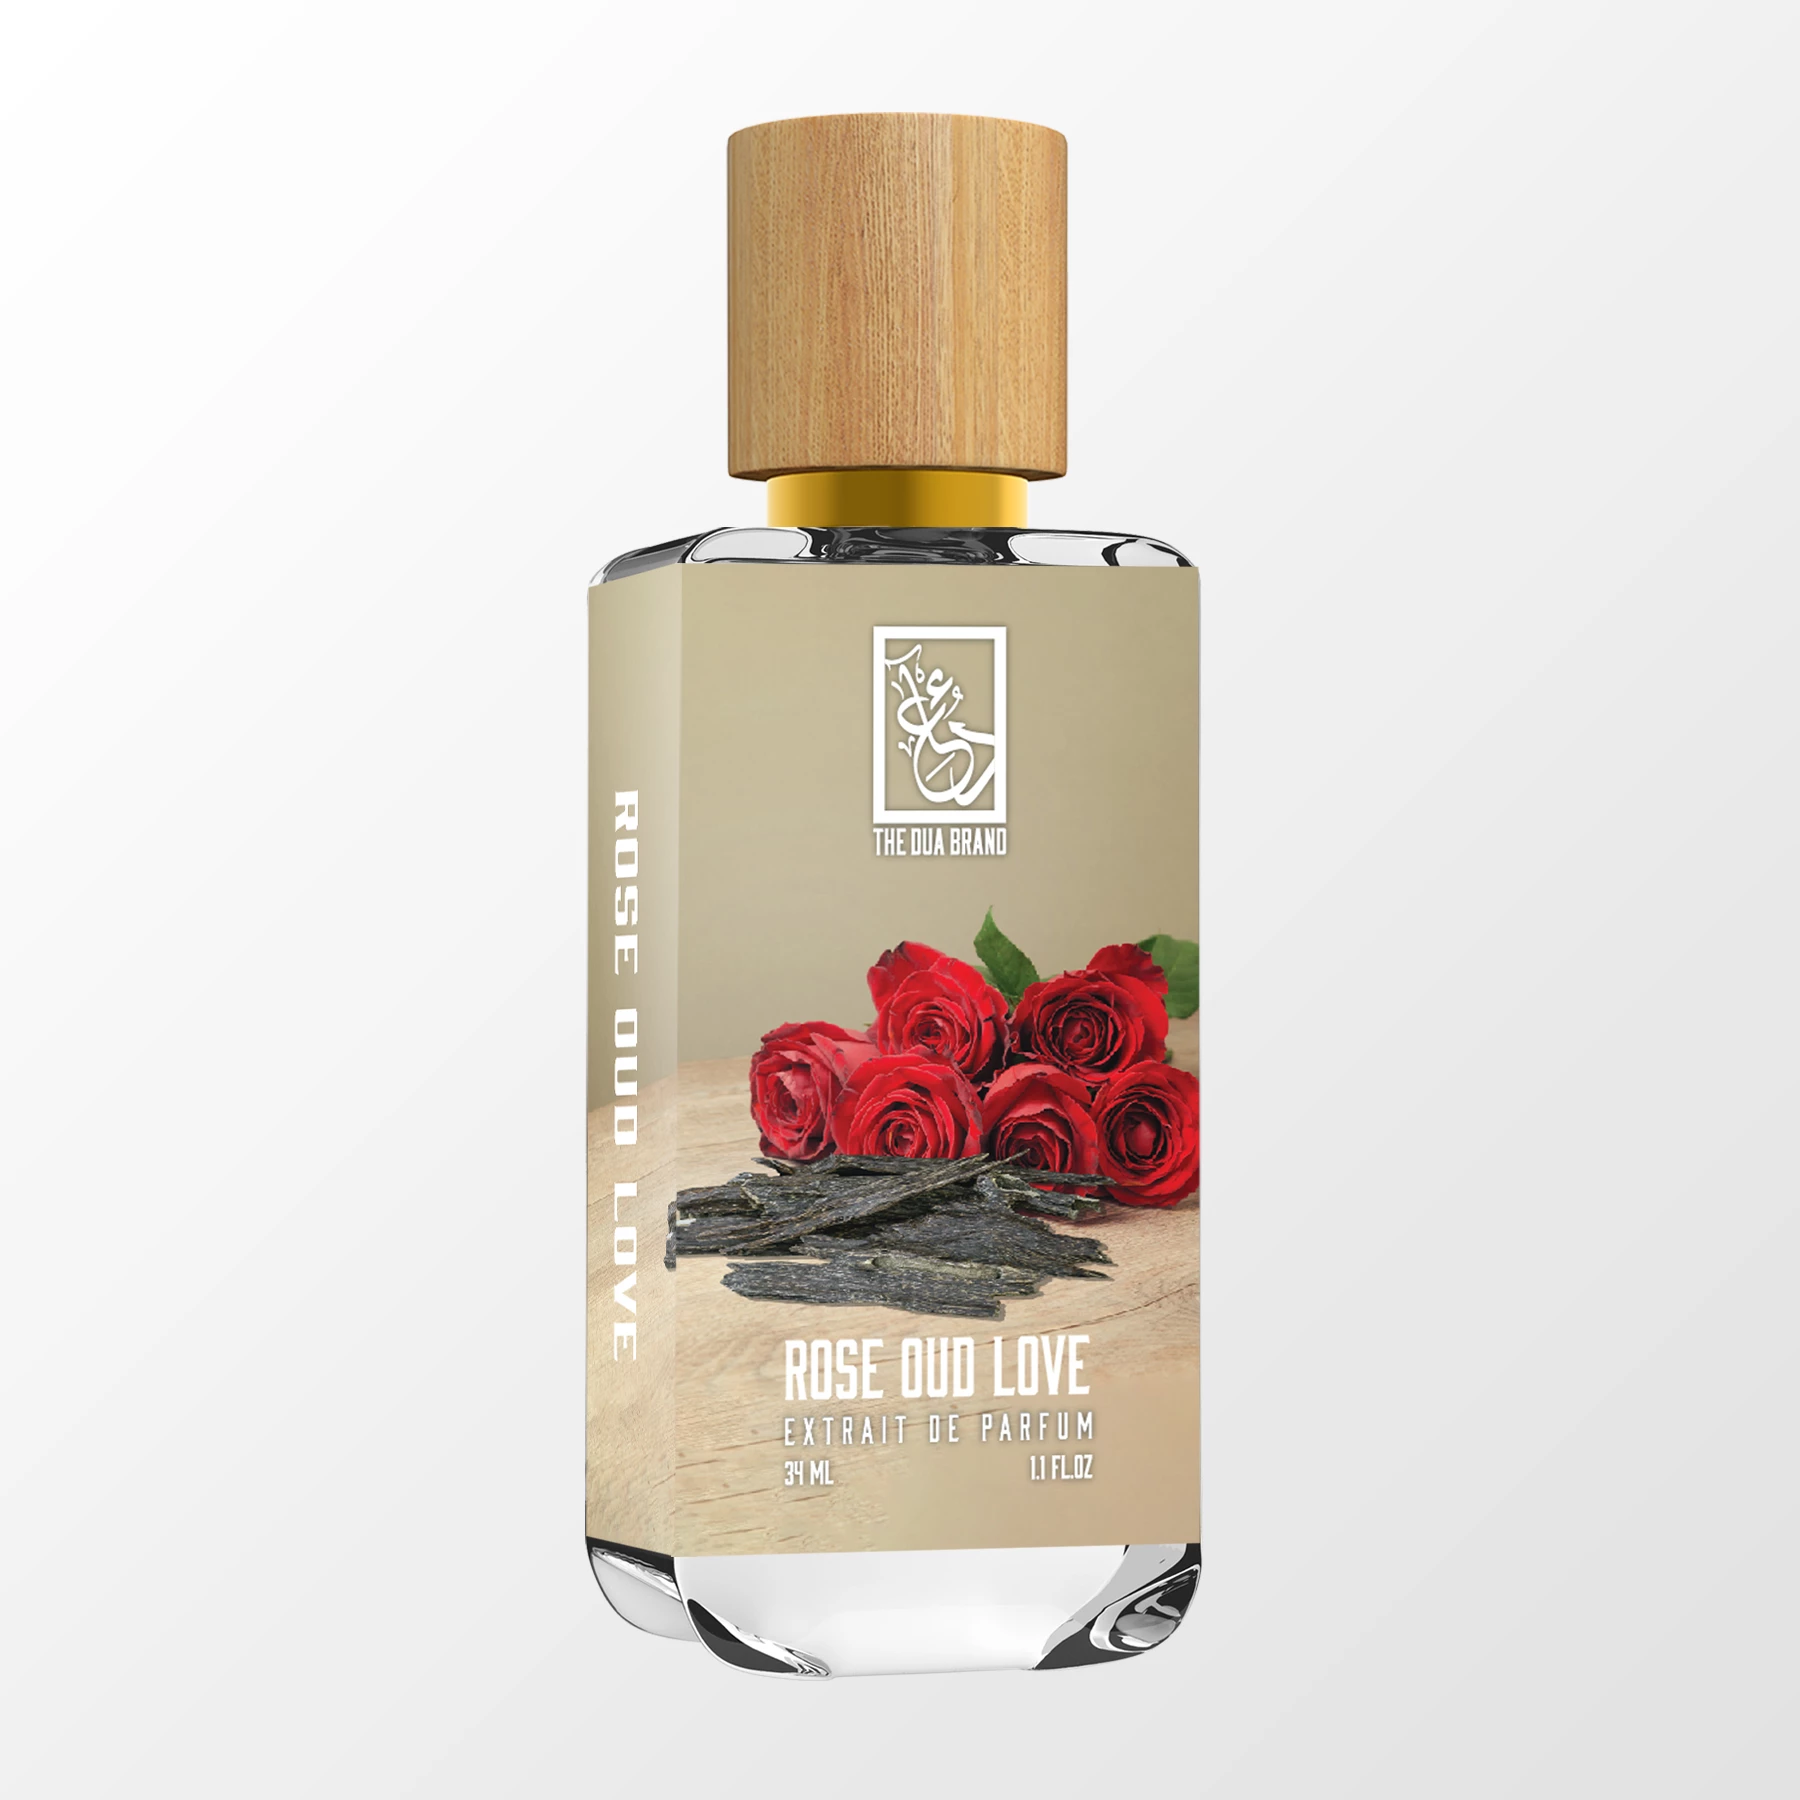 Rose Oud Love - DUA FRAGRANCES - Inspired by Love, Don't be Shy